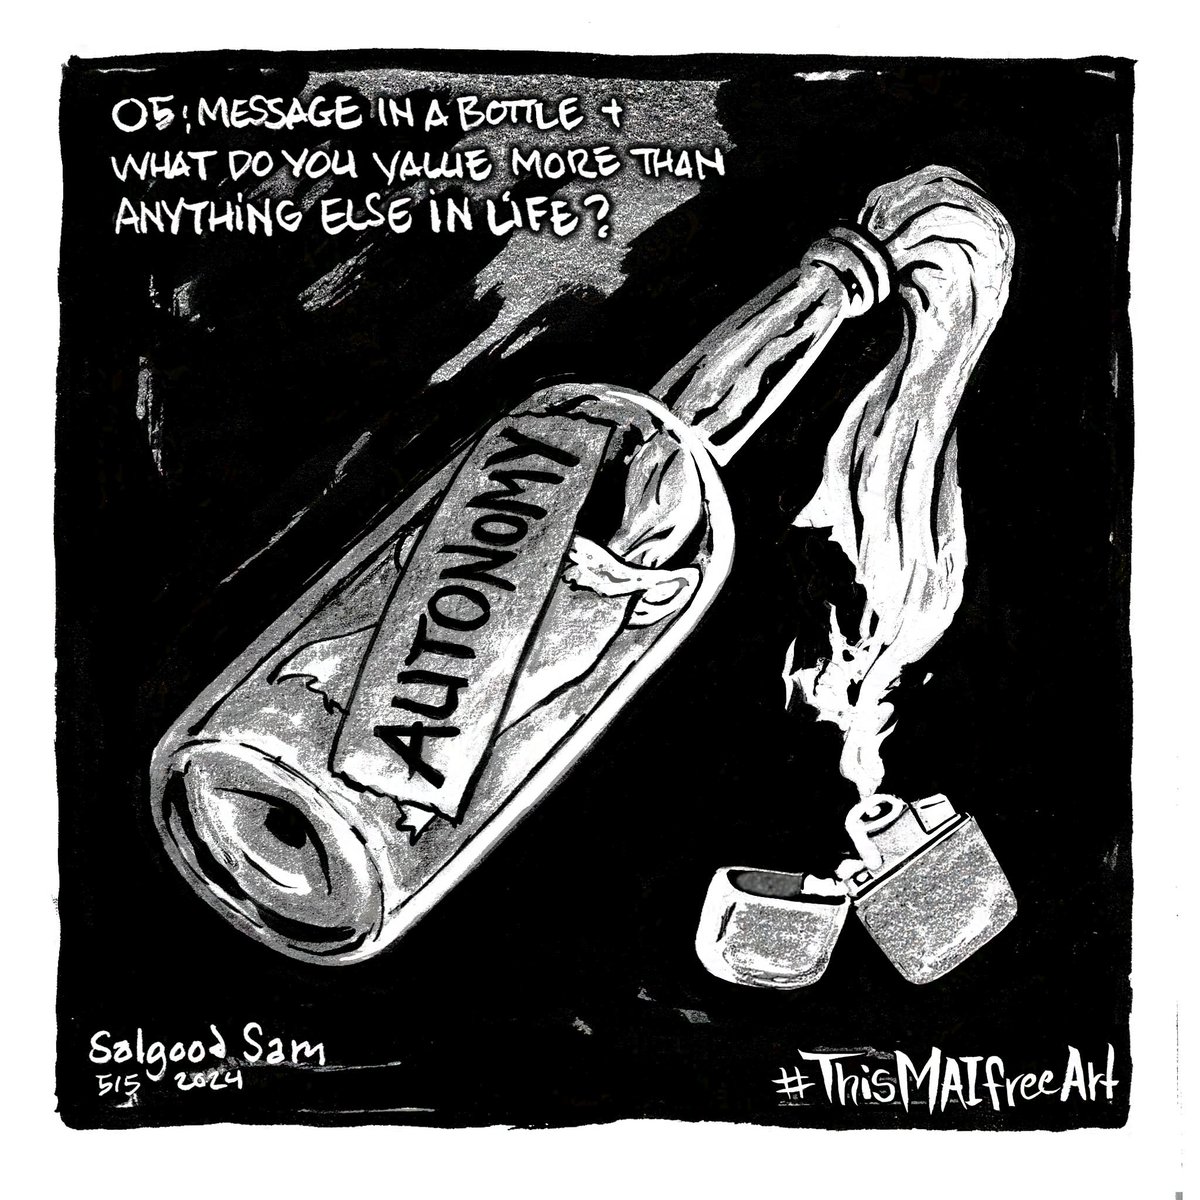 Day Five of #ThisMAIfreeArt the #HumanMadeArts challenge. Prompt is 'Message in a bottle'; counter prompt is 'What do you value more than anything else in life?'.
#NoAI #IsupportHumanMadeArts #EndTheOccupation #Autonomy #Molotov